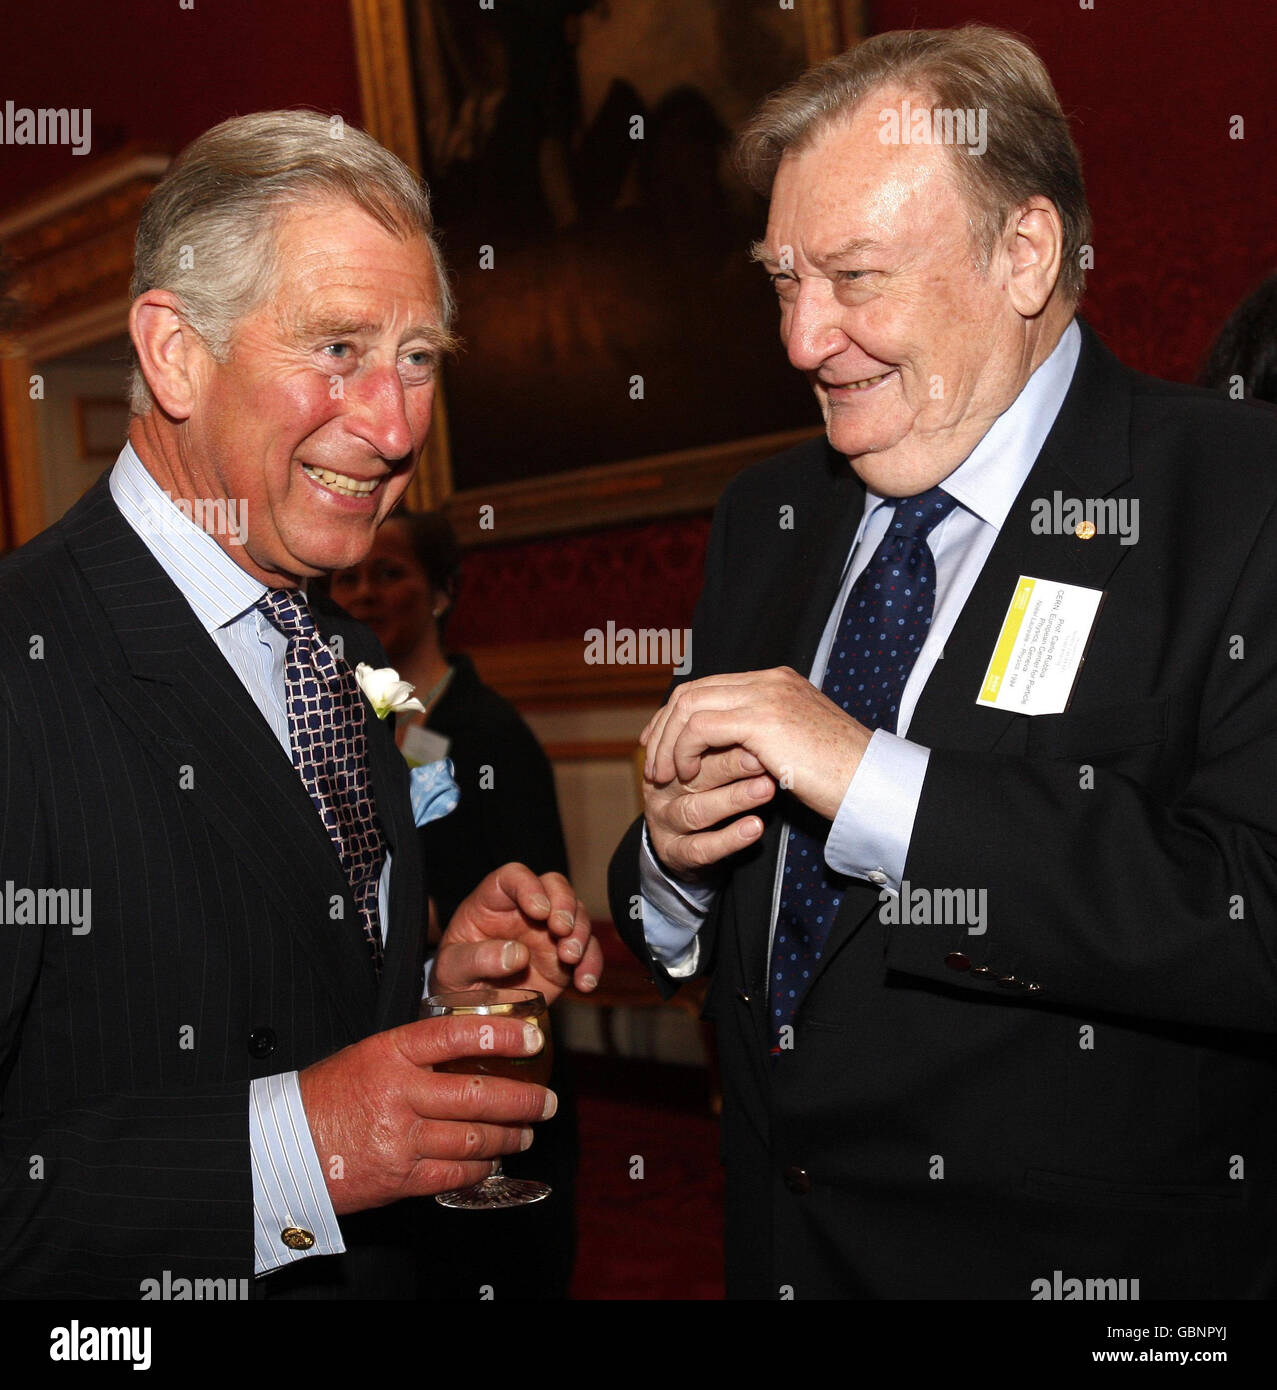 The Prince of Wales, left, Patron of the University of Cambridge Programme for Sustainability Leadership, talks with Professor Carlo Rubbia, the winner of the Nobel Prize in Physics in 1984, during a reception for Nobel Laureates and climate change experts at St James's Palace in London. Stock Photo